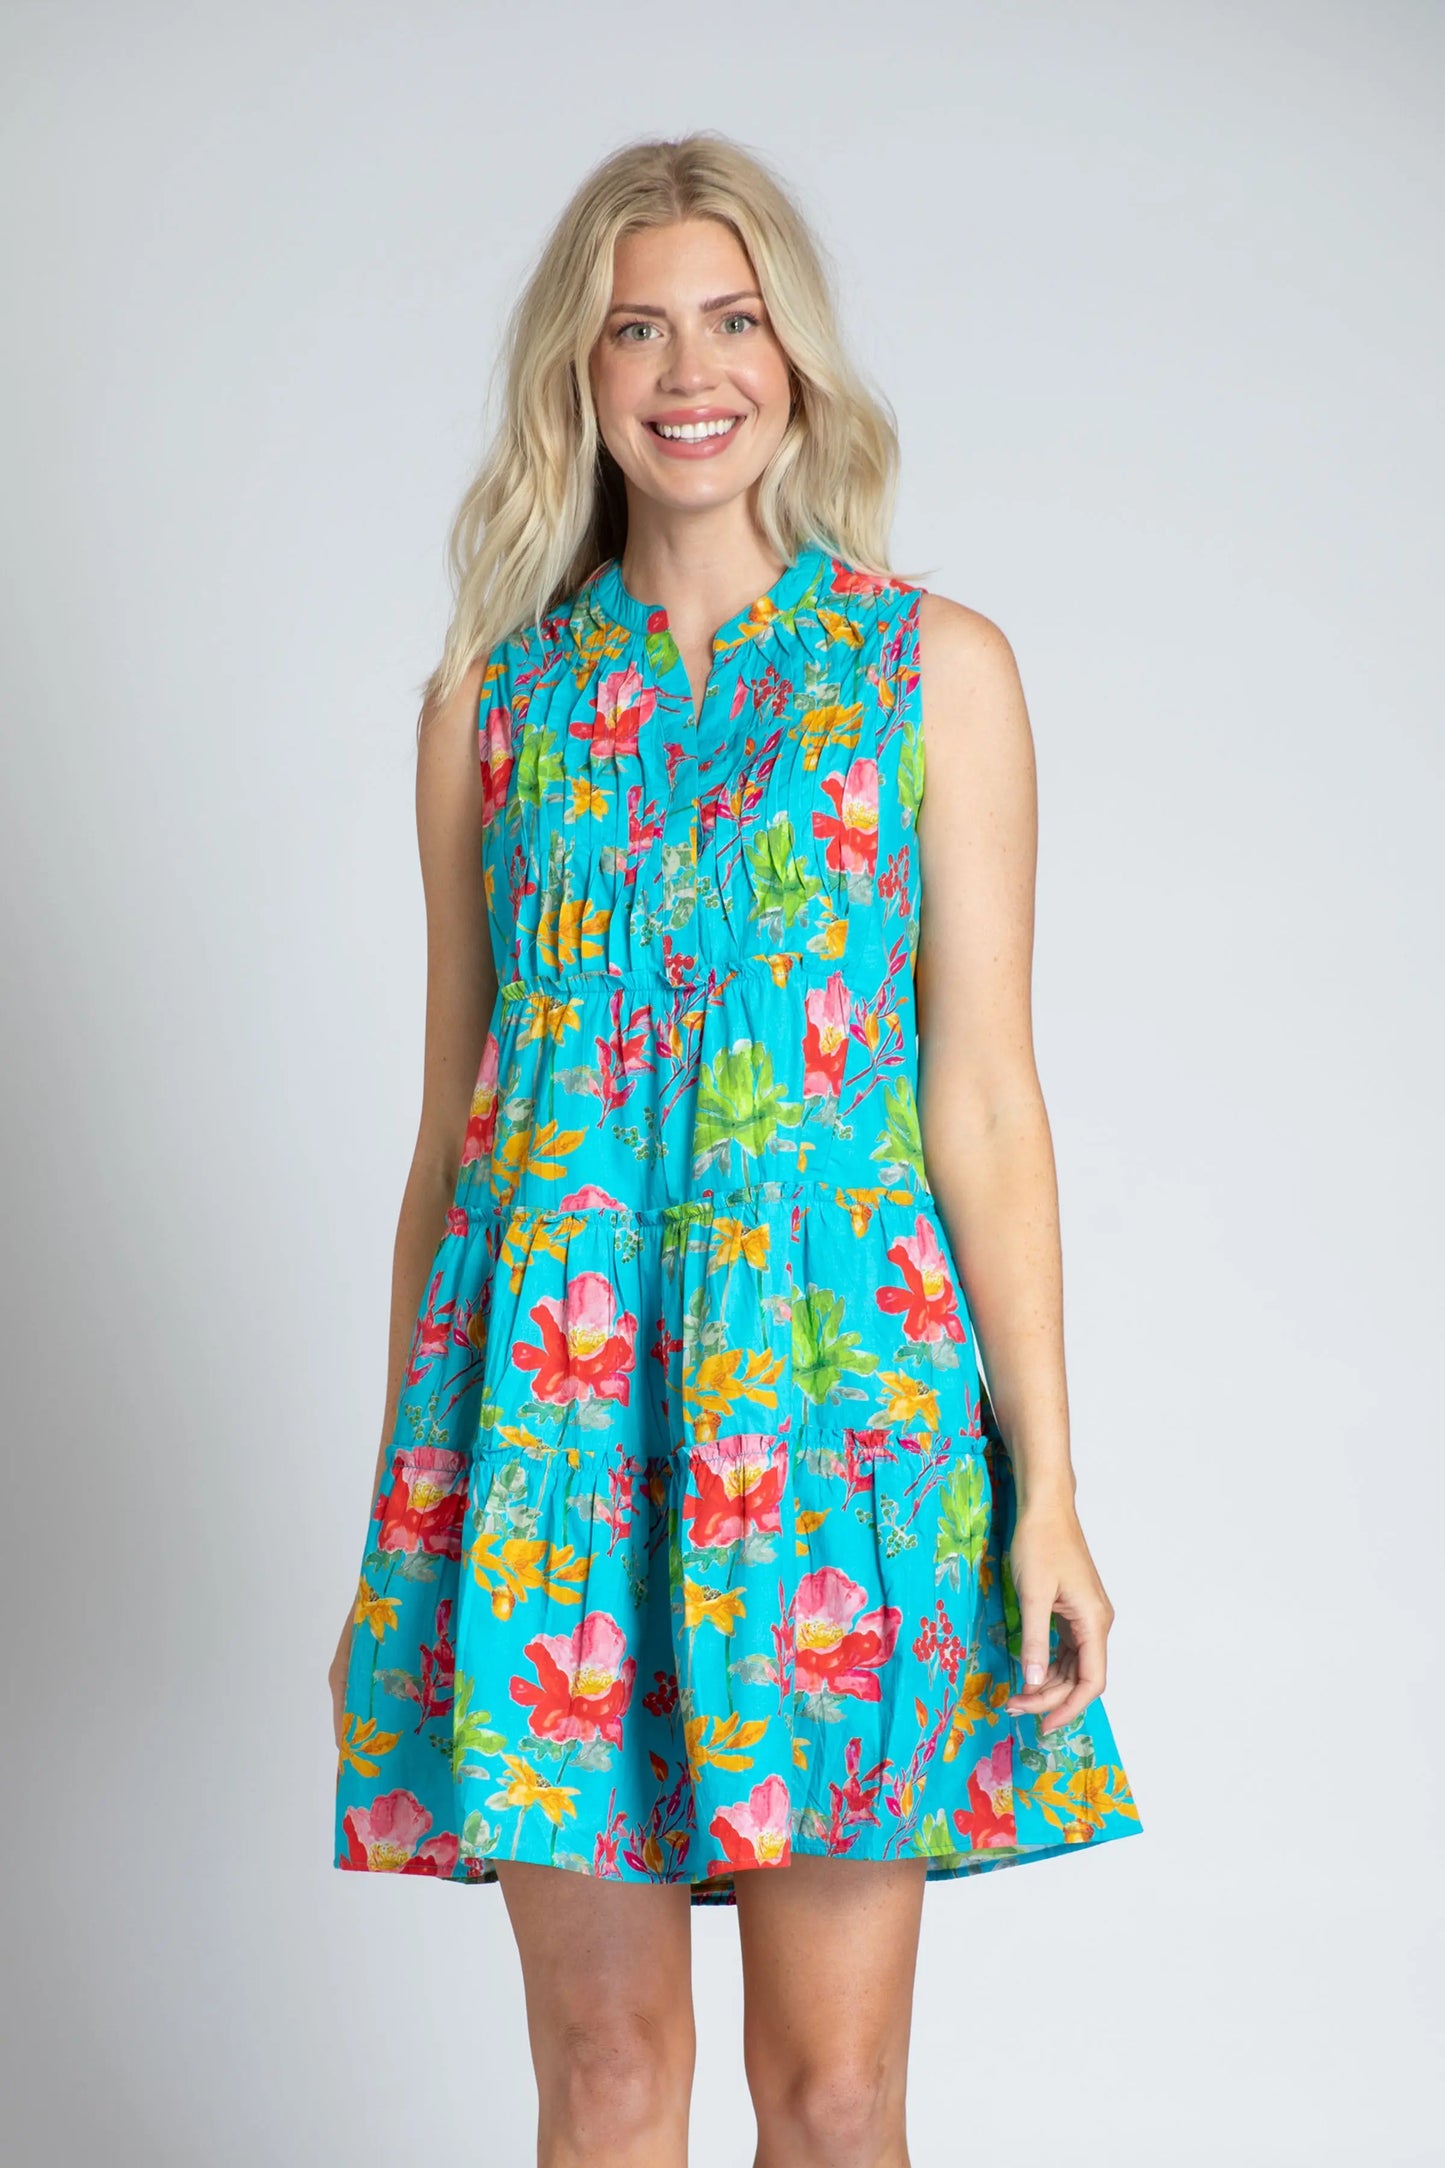 Sleeveless dress with pin-tuck detail